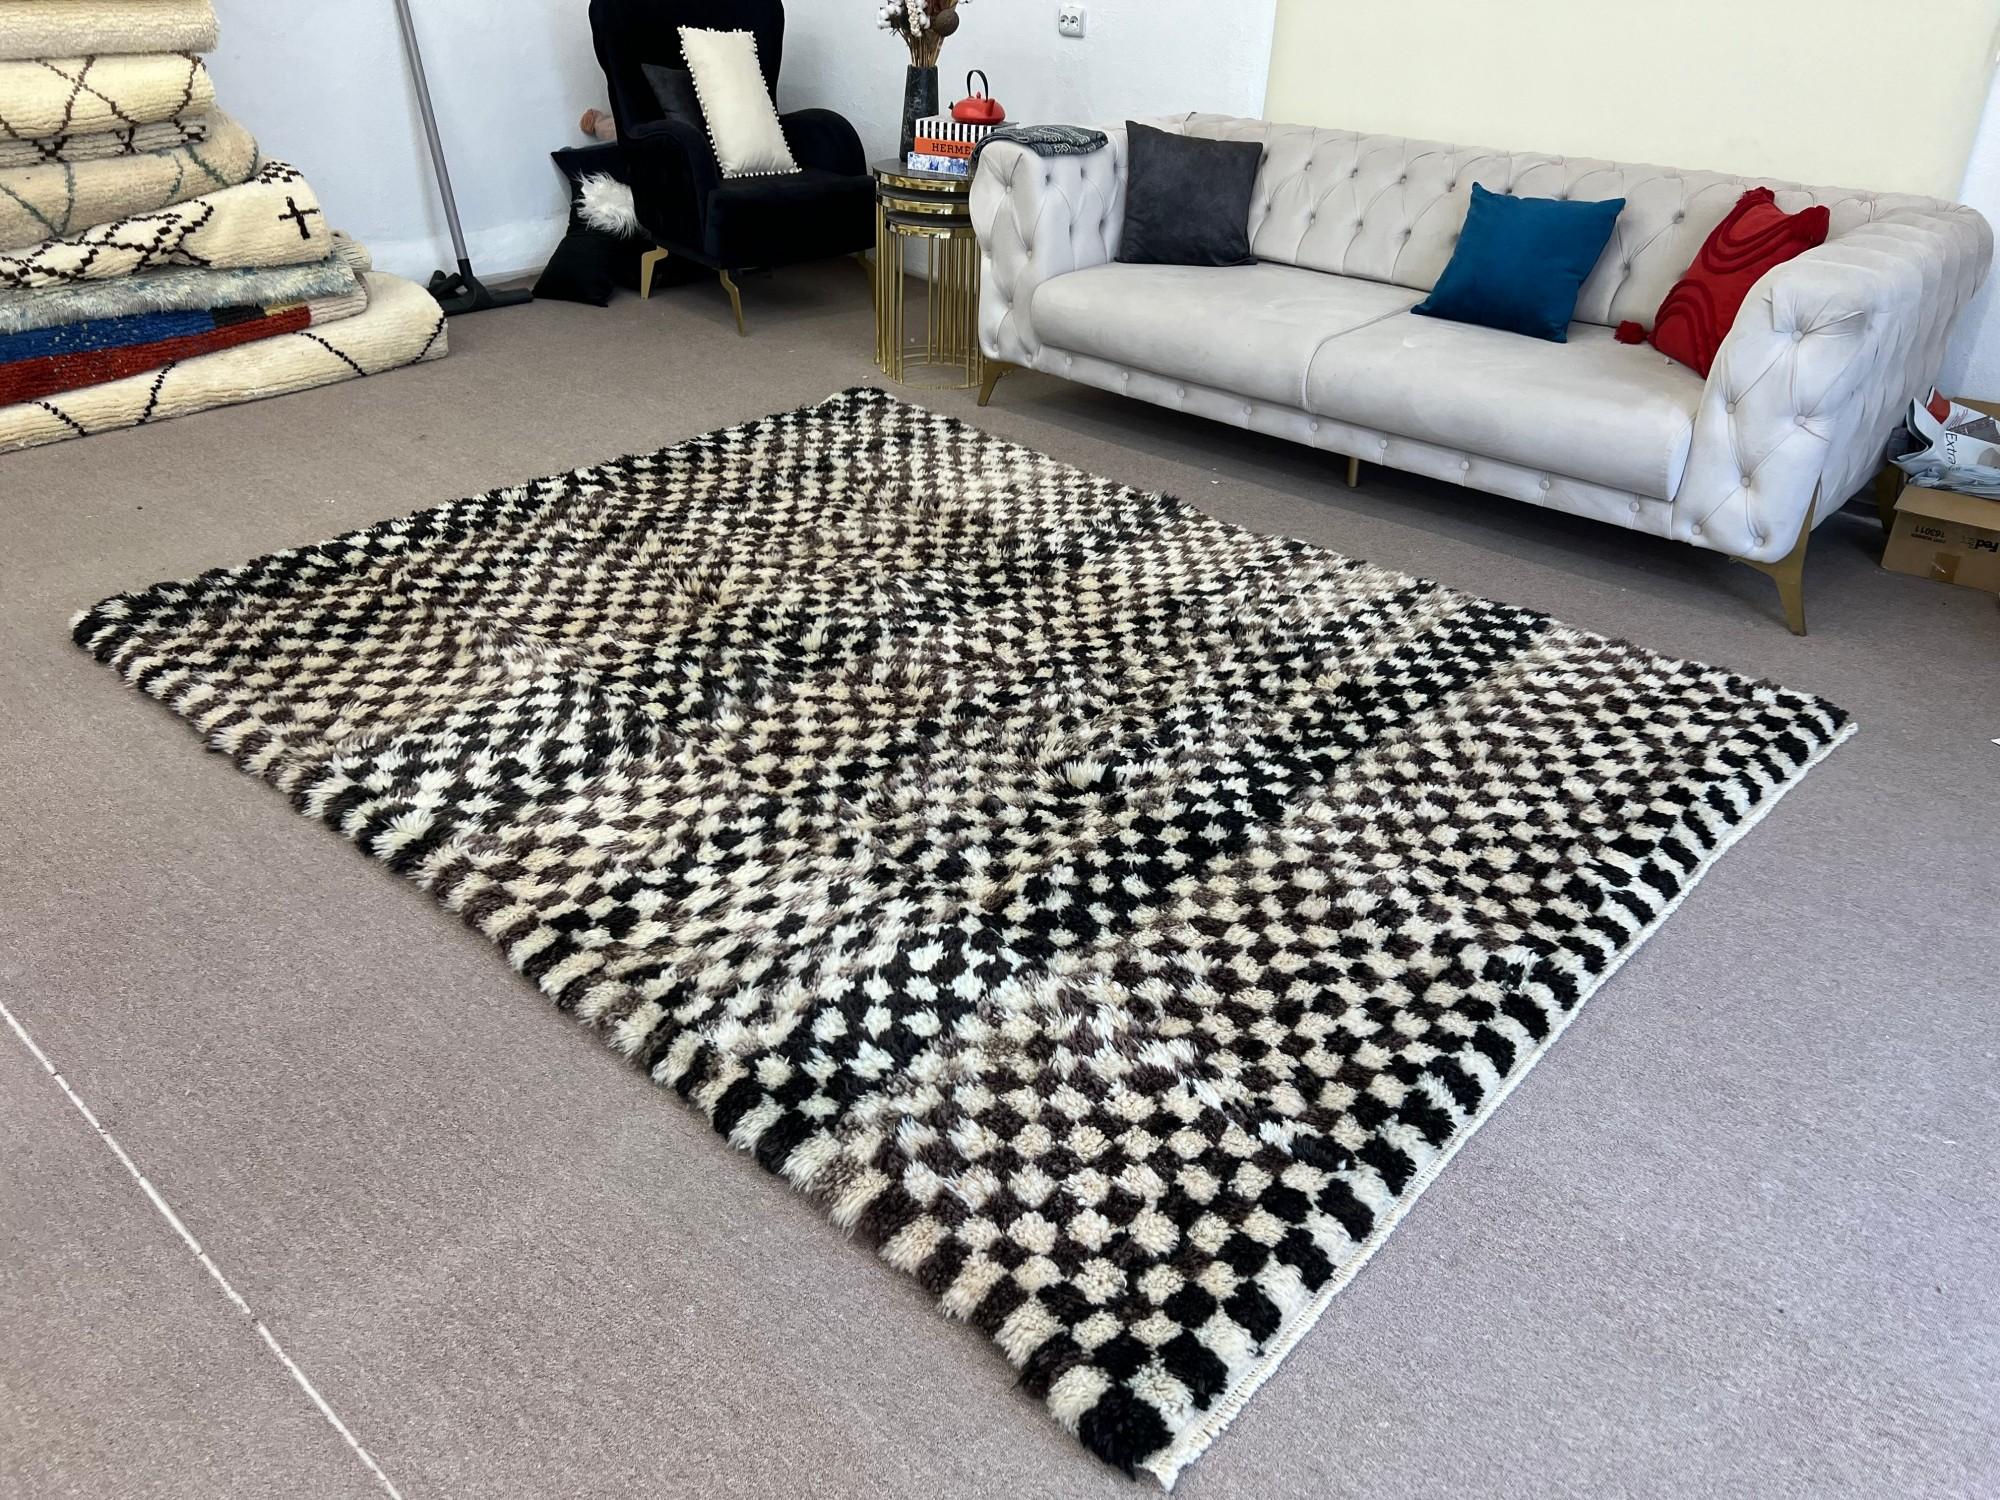 Turkish 7.4x9.2 Ft Checkered Handmade Tulu Rug in Beige, Black & Black, All Natural Wool For Sale